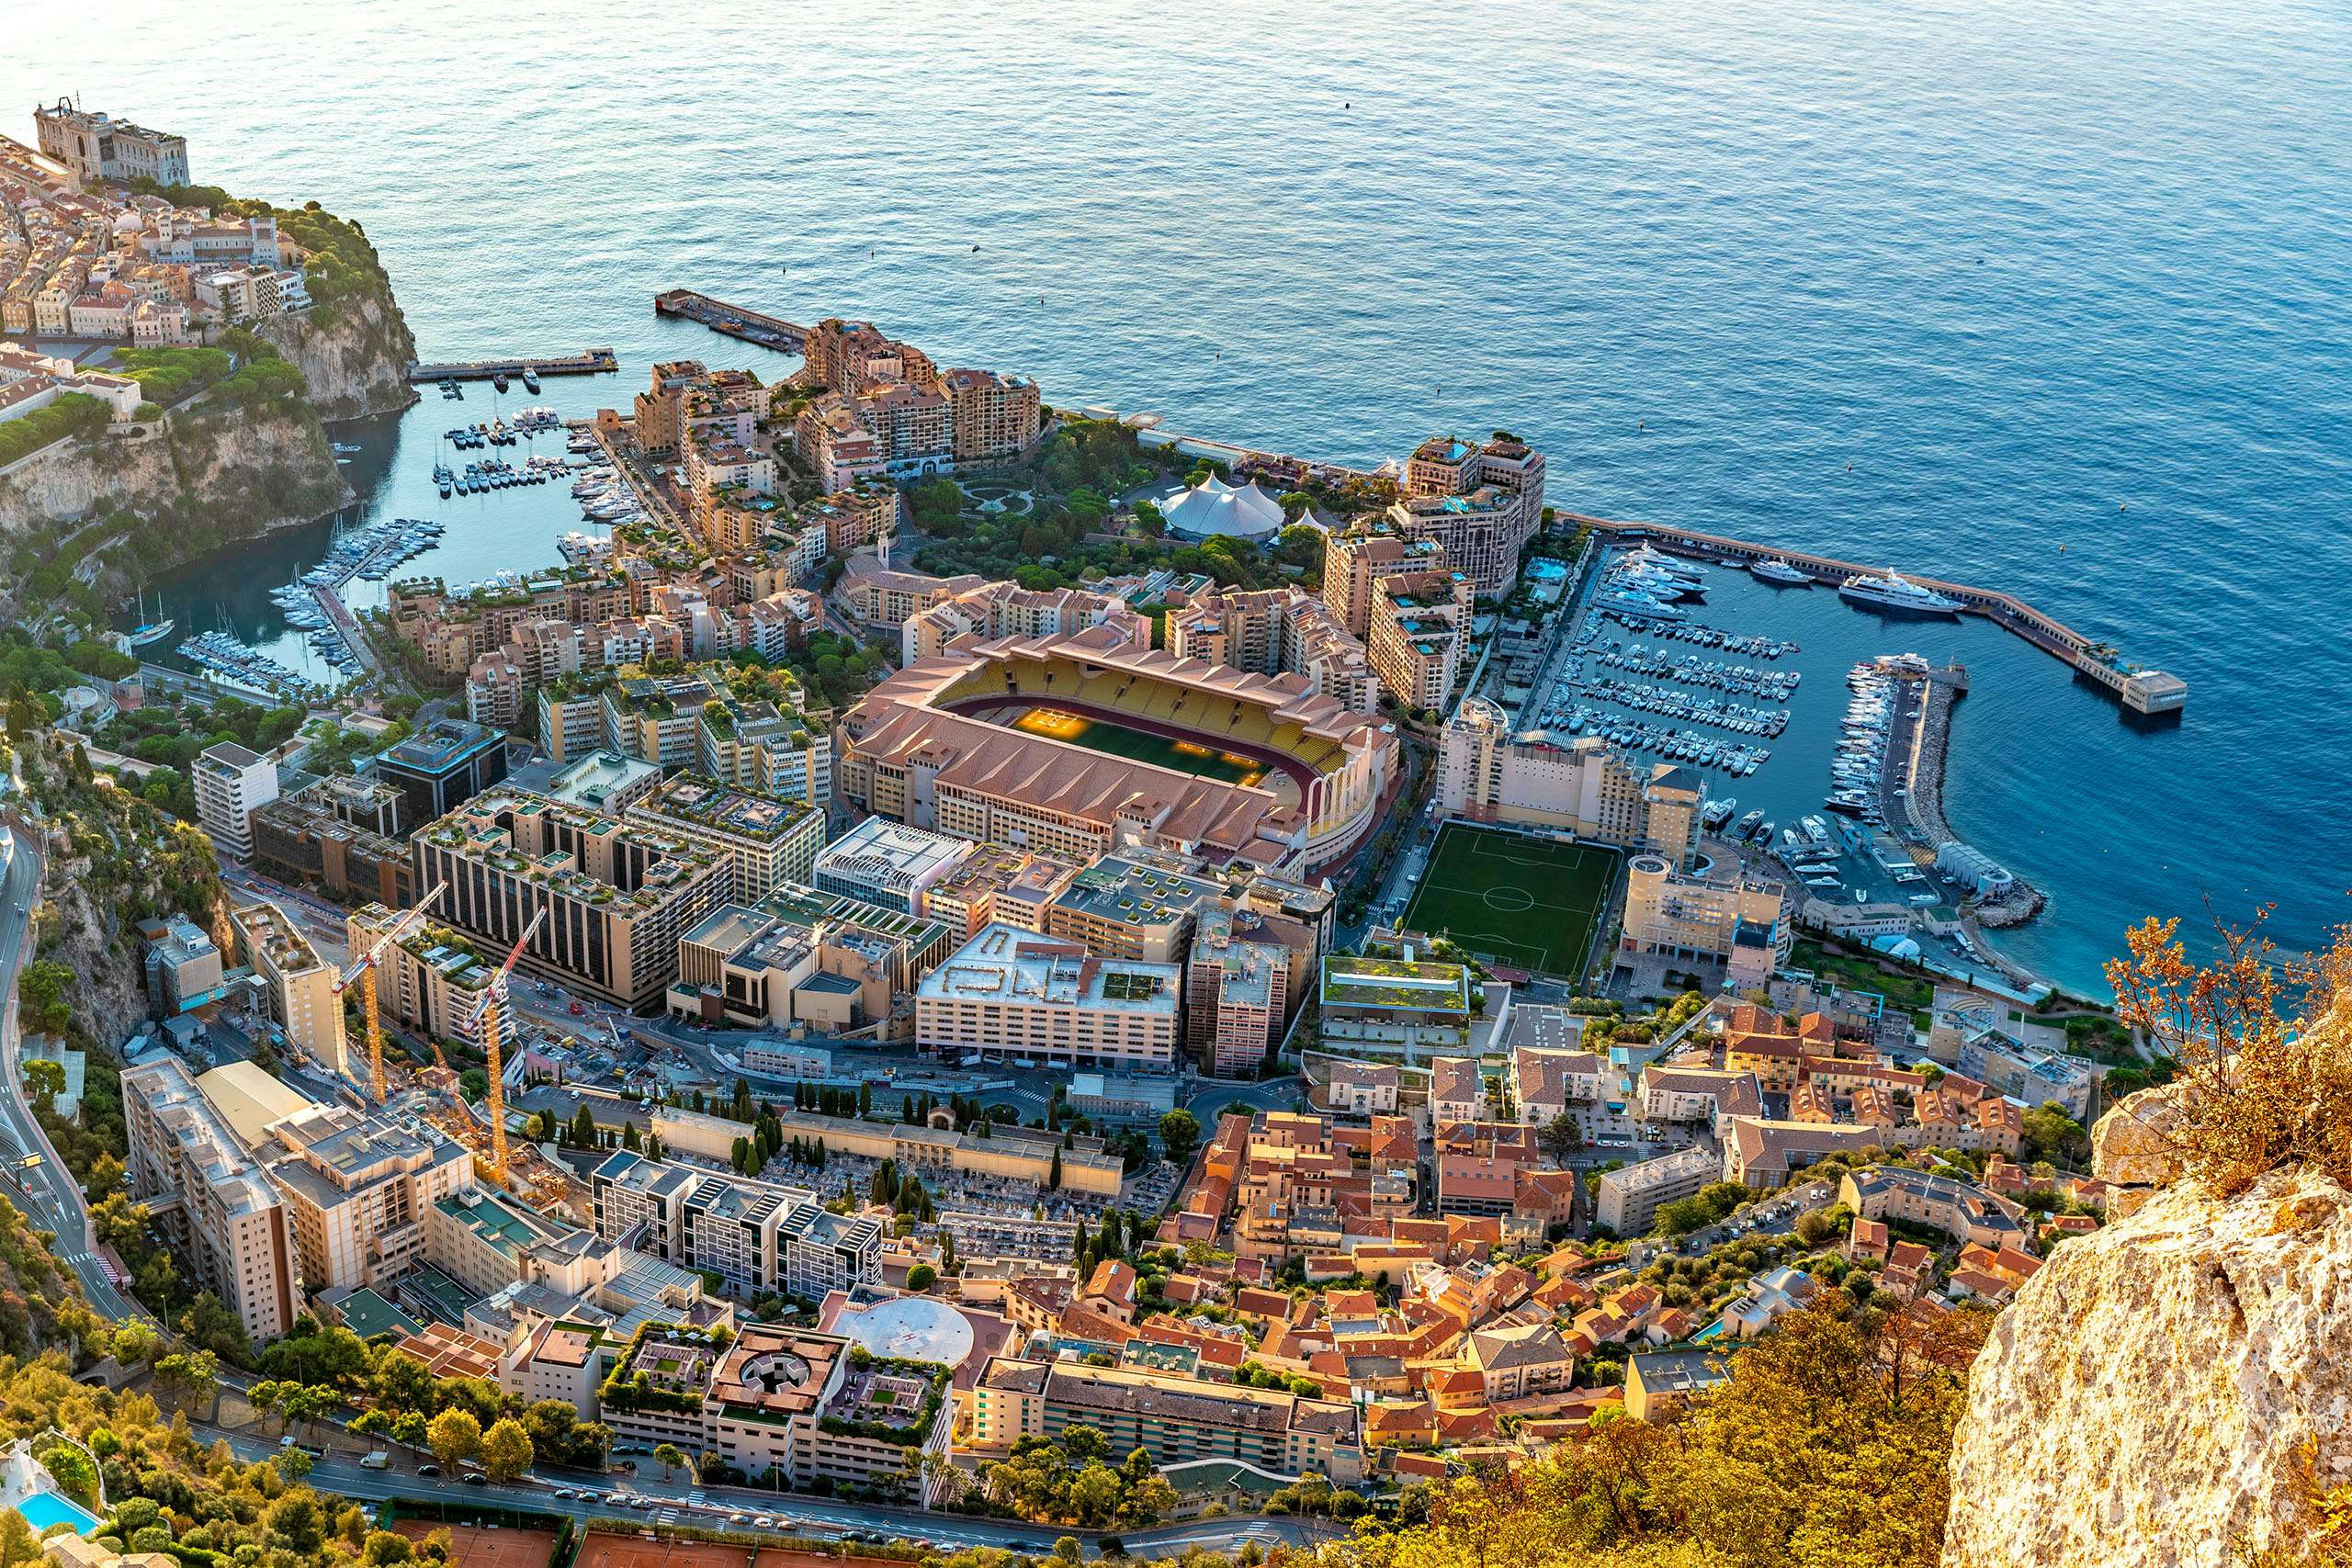 Panoramic view of Monte Carlo harbor filled with luxury yachts, encapsulating the essence of yacht charter in Monaco